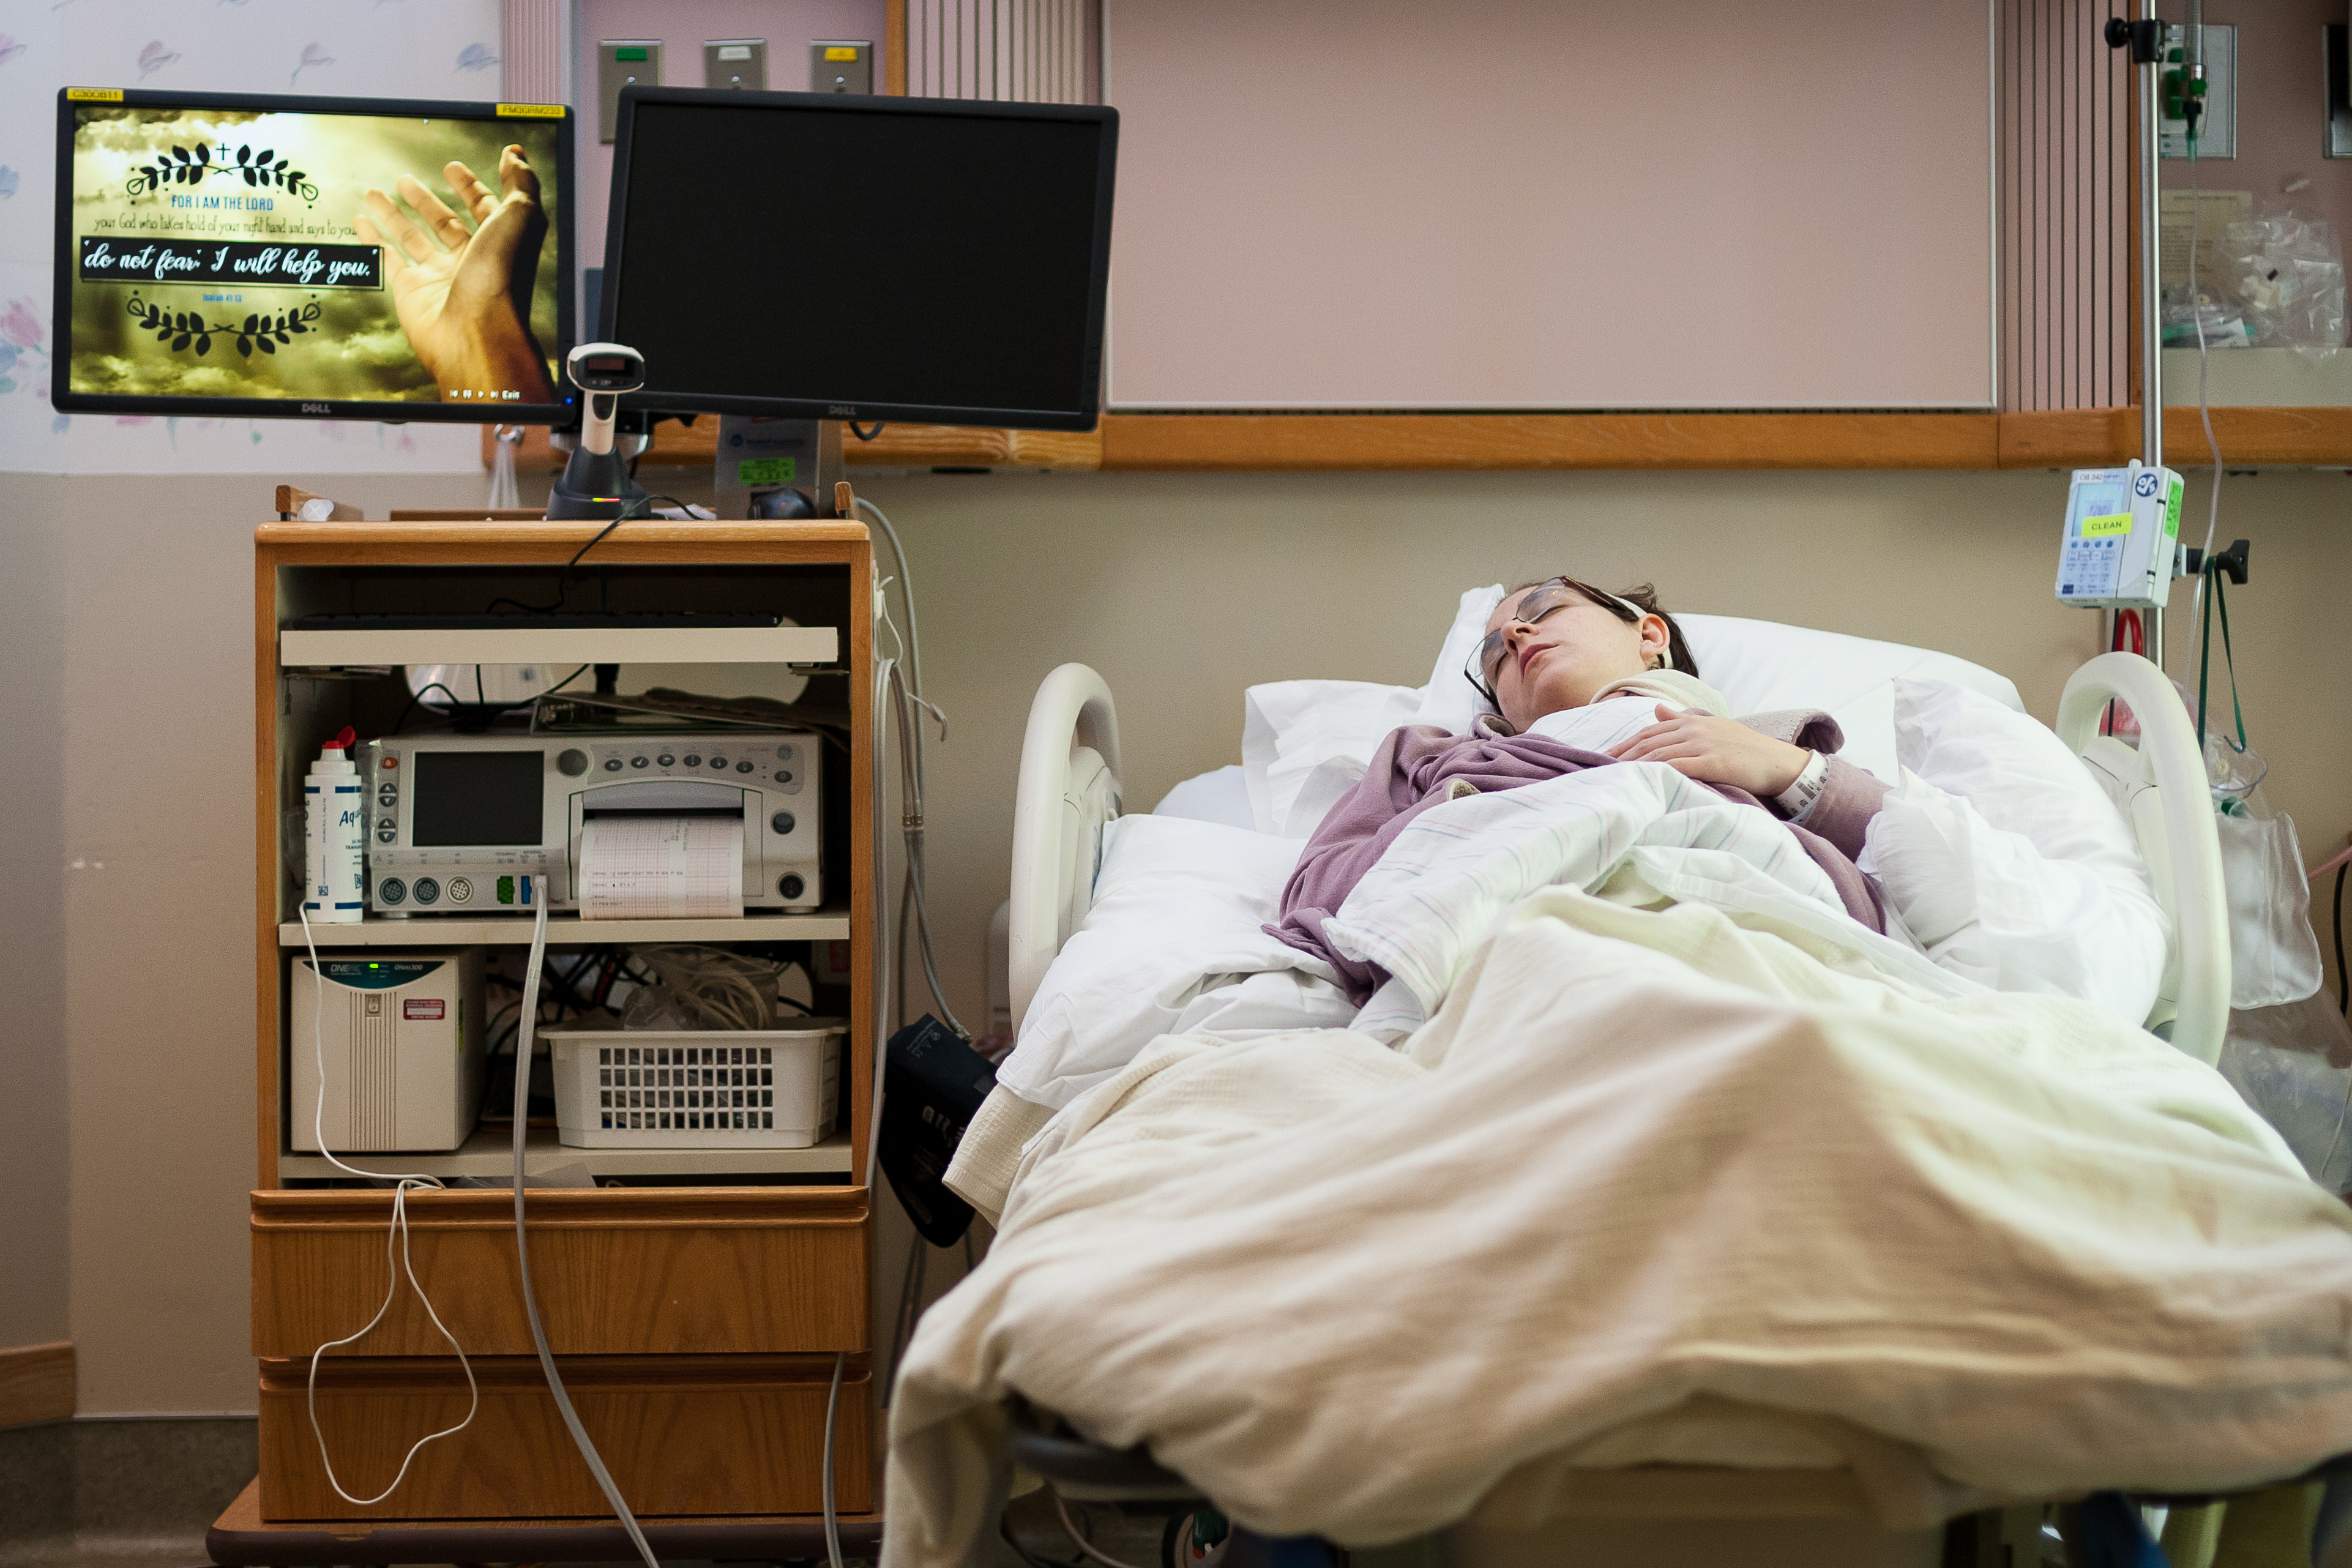 Female hospital patient lays in bed appearing asleep. Beside her is a TV.